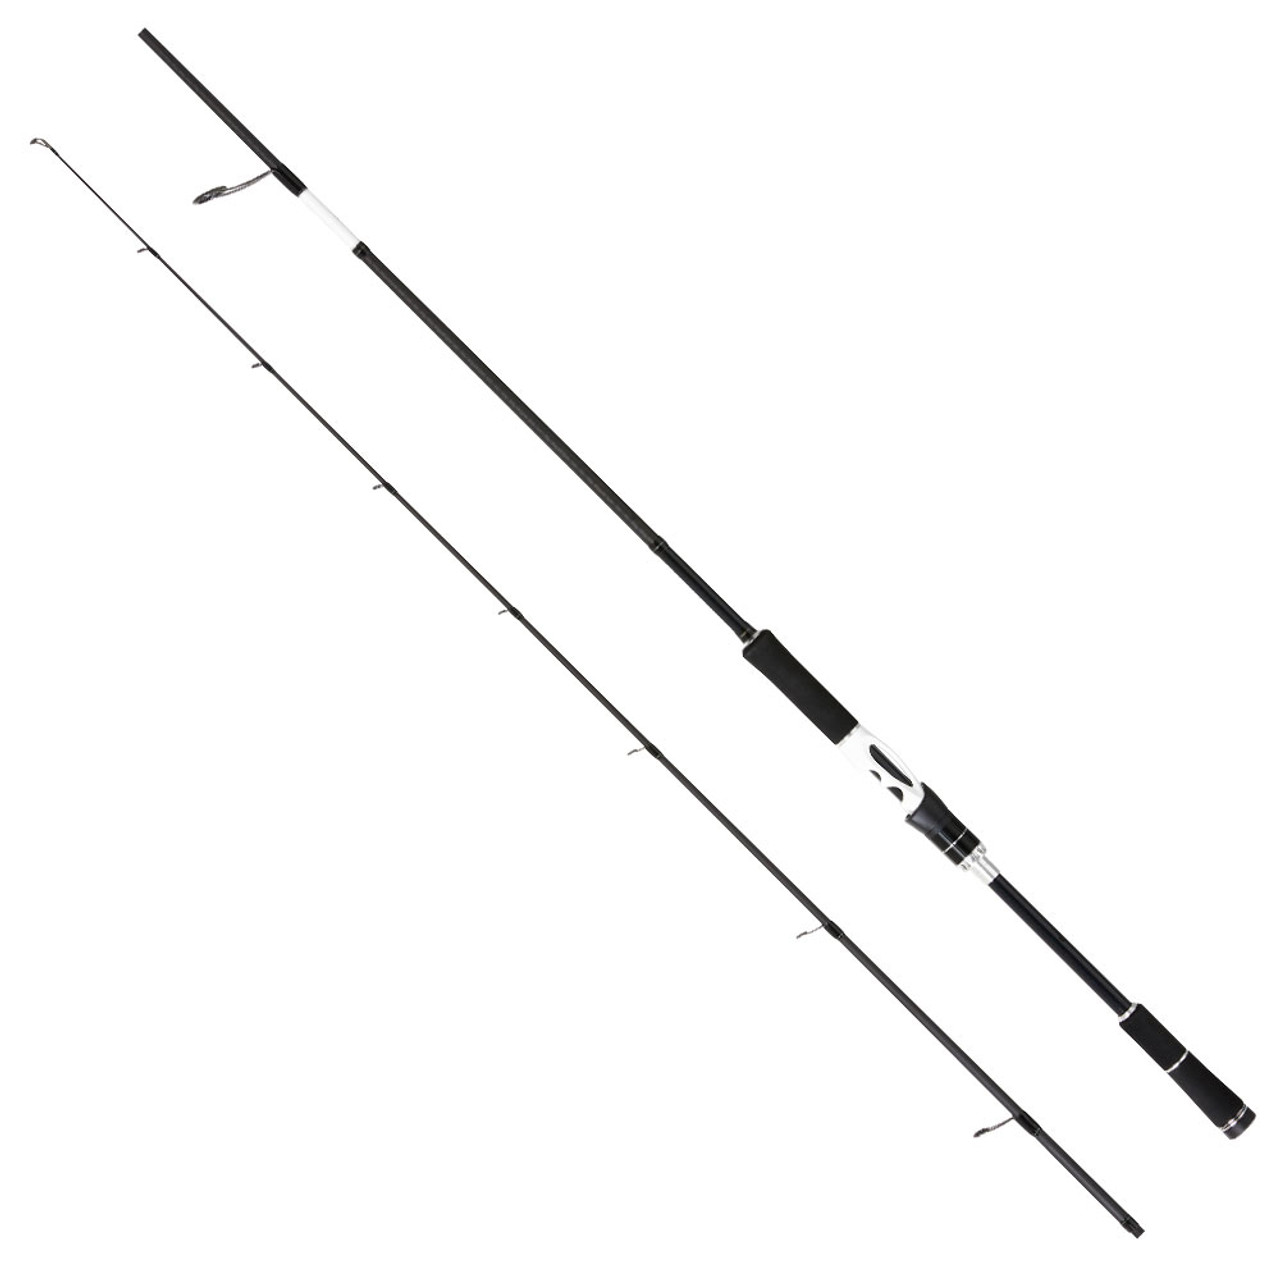 https://cdn11.bigcommerce.com/s-55834/images/stencil/1280x1280/products/4470/19051/shimano-jewel-rods-new__61276.1656403174.jpg?c=2